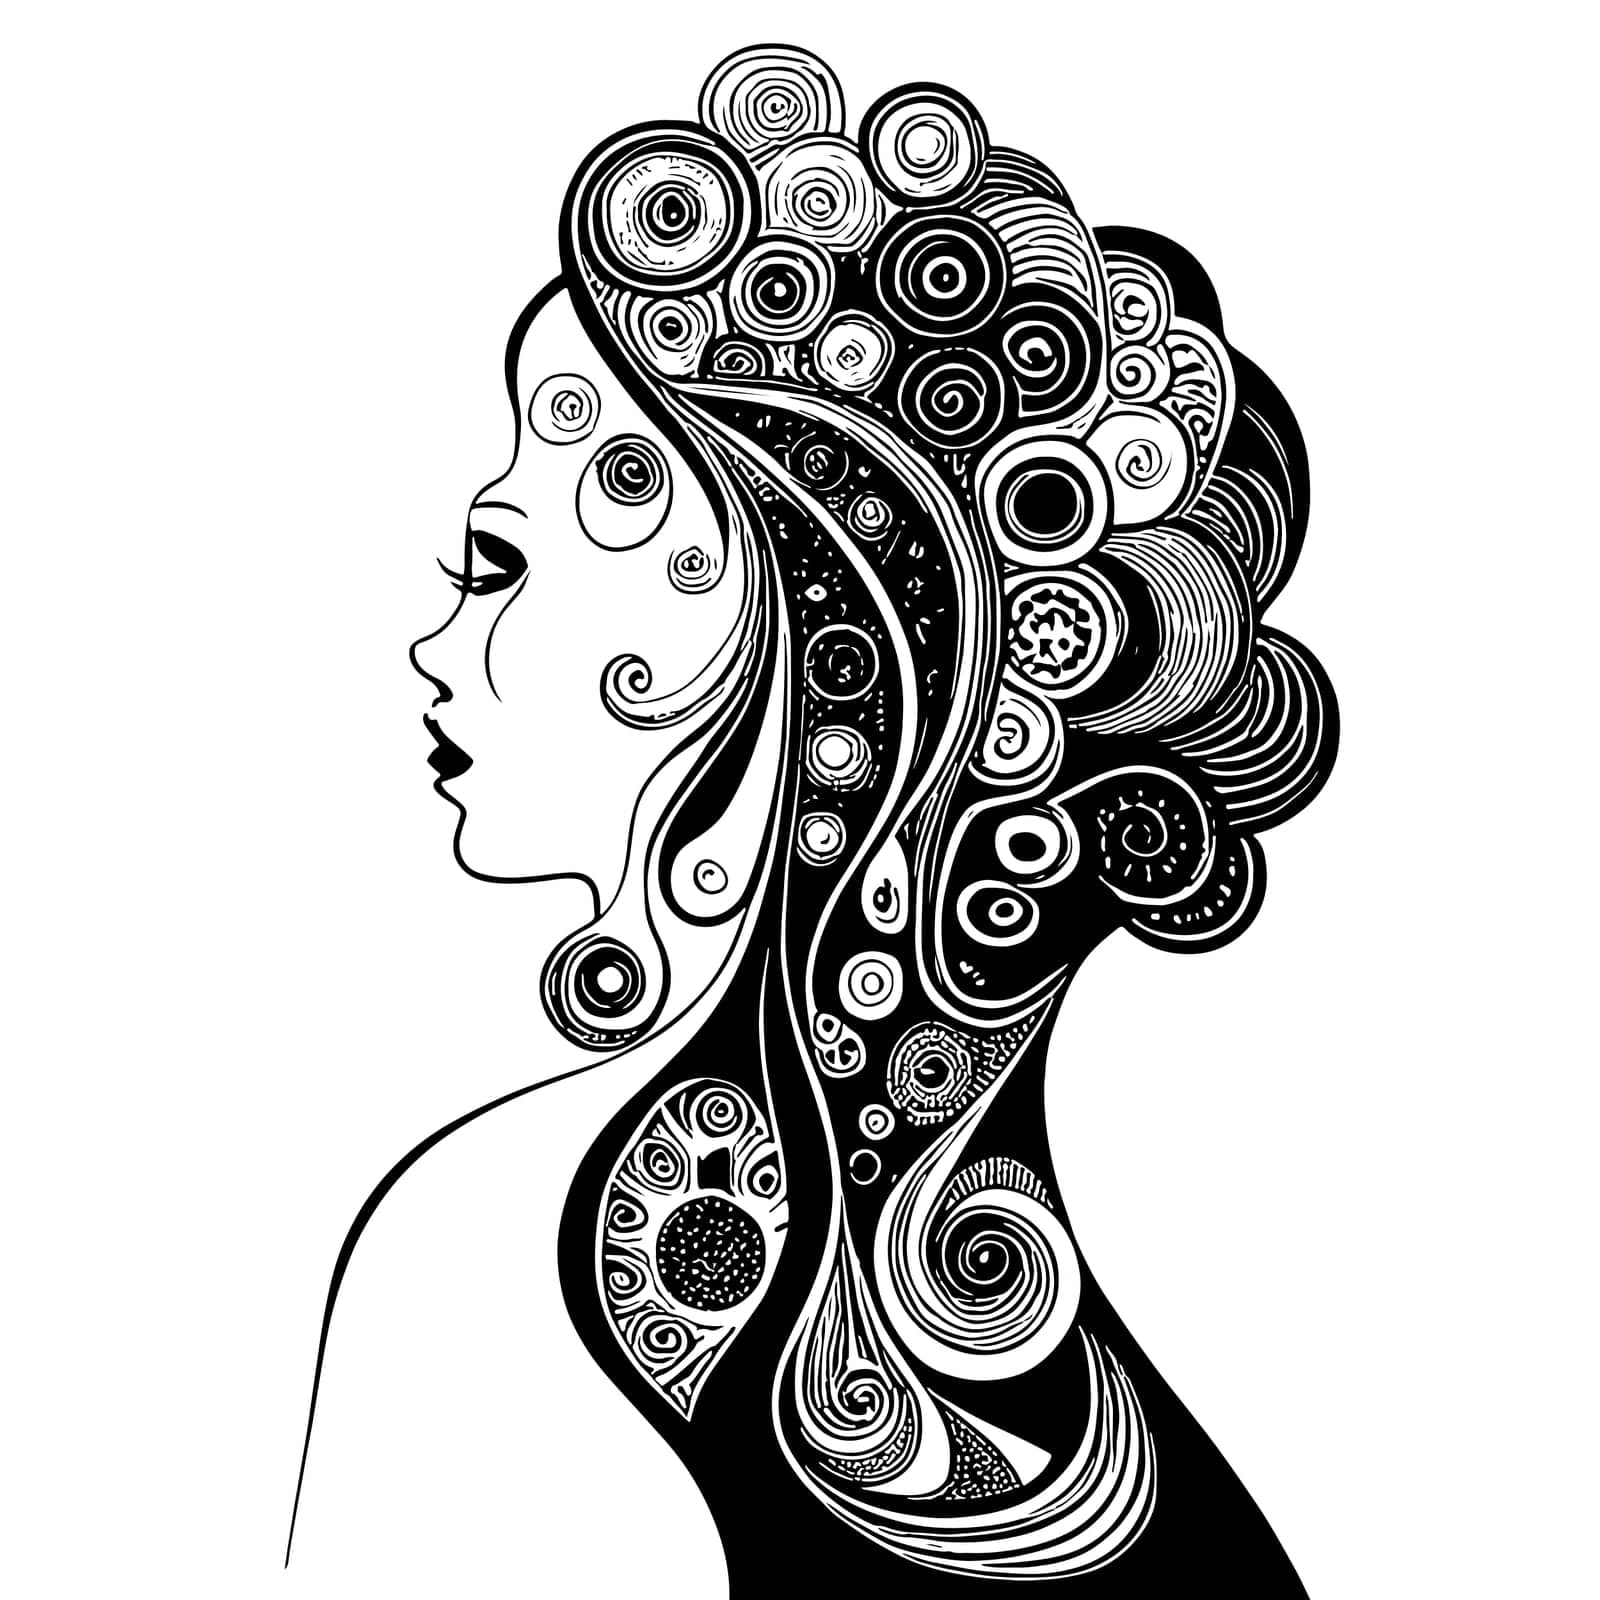 Sketch of beautiful woman silhouette with art hairstyle black and white design. by EkaterinaPereslavtseva